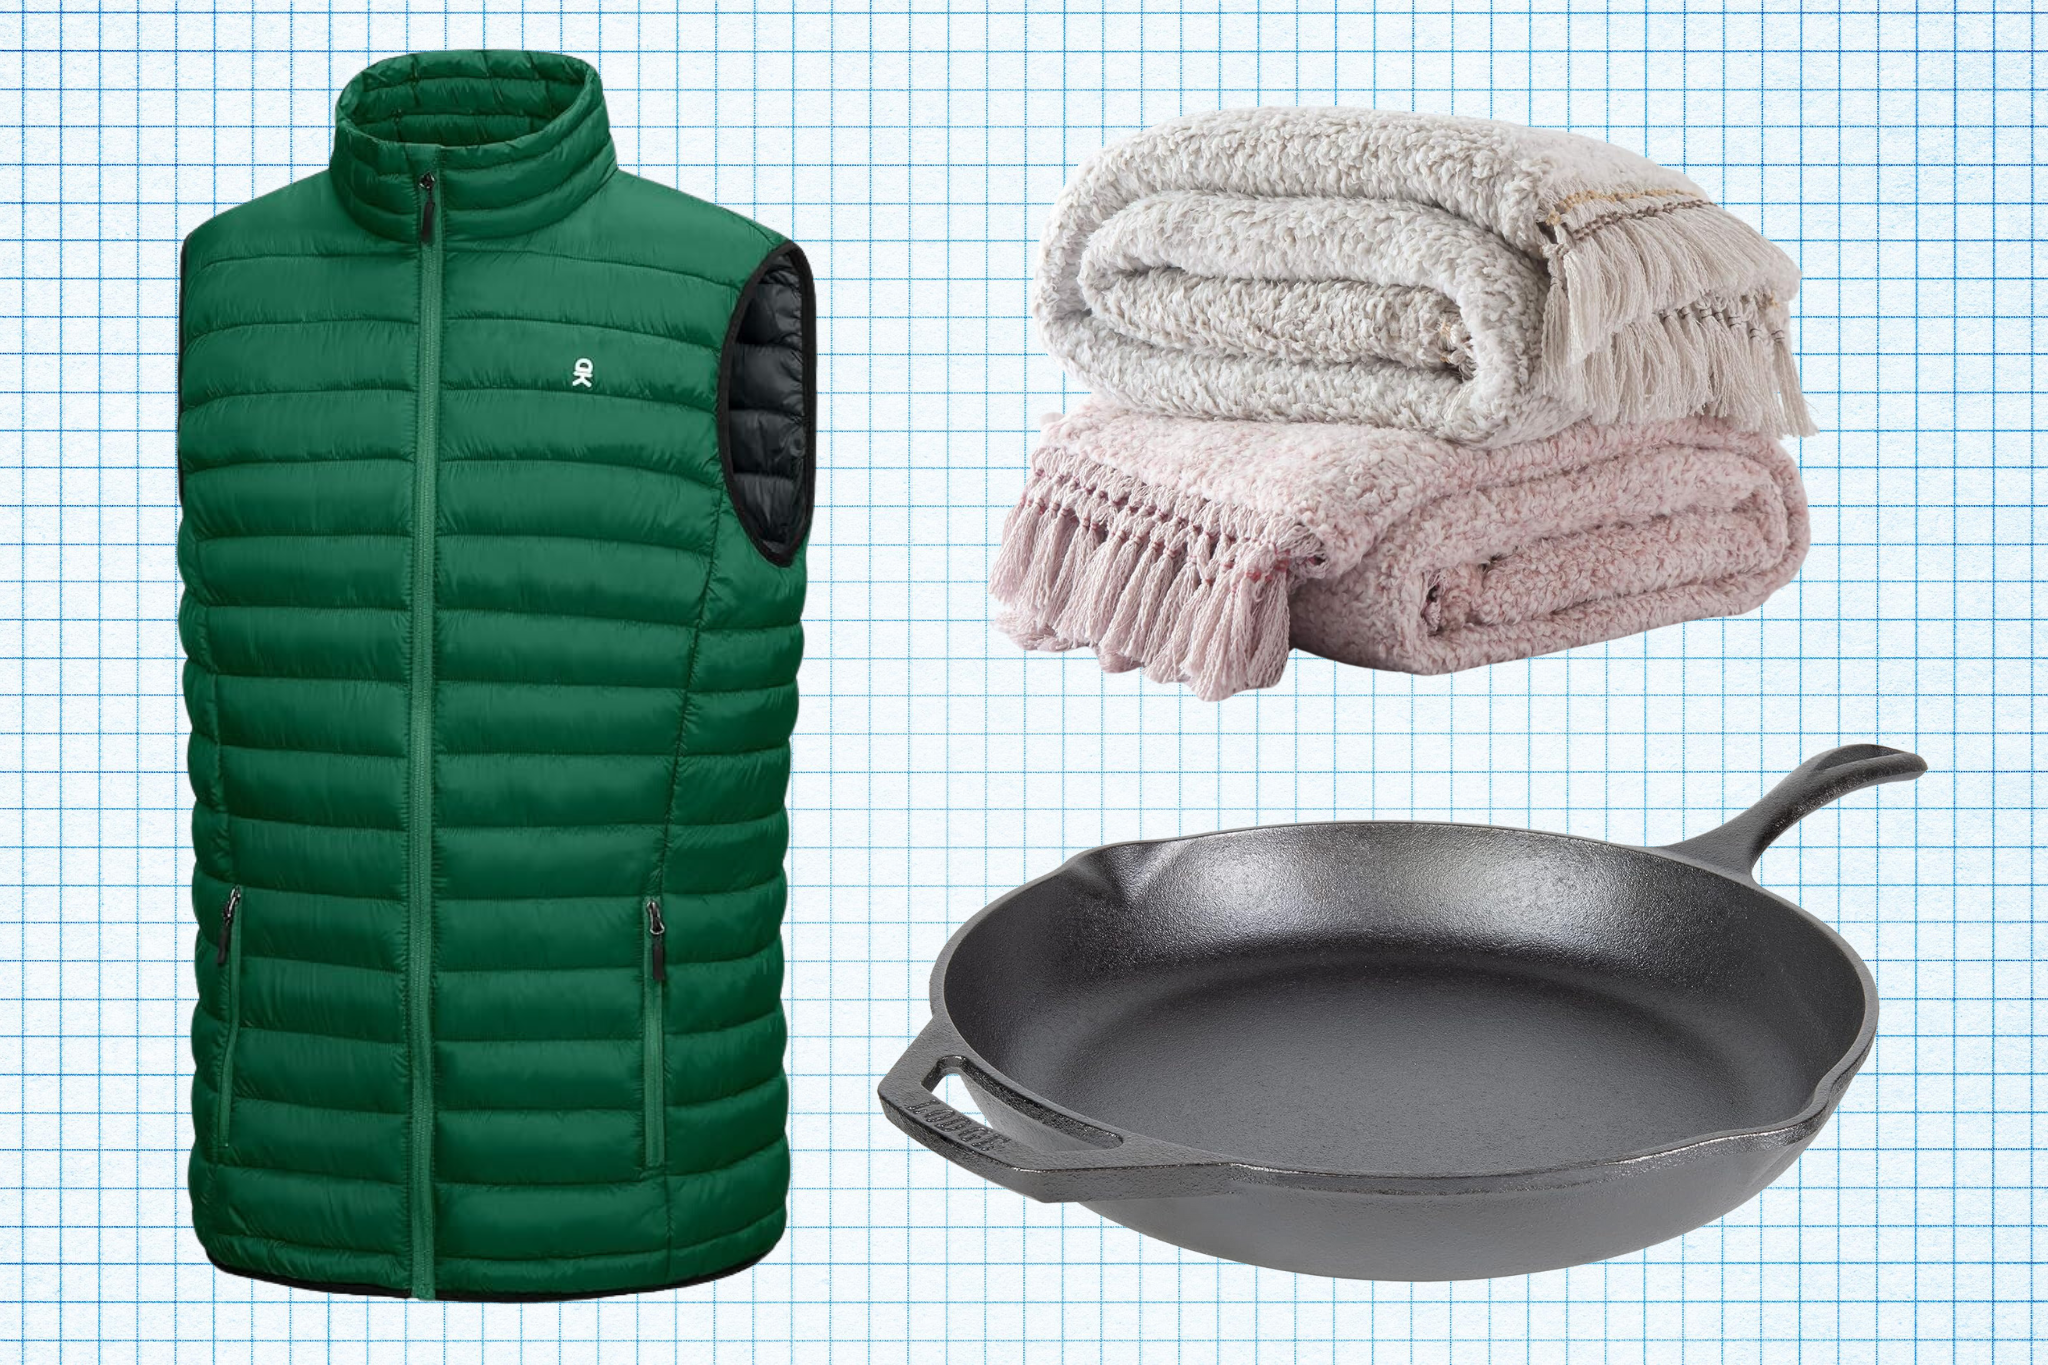 Little Donkey Andy Lightweight Puffer Vest, HORIMOTE HOME Sherpa Throw Blanket, and Lodge 12-Inch Cast Iron Skillet isolated on a grid paper background